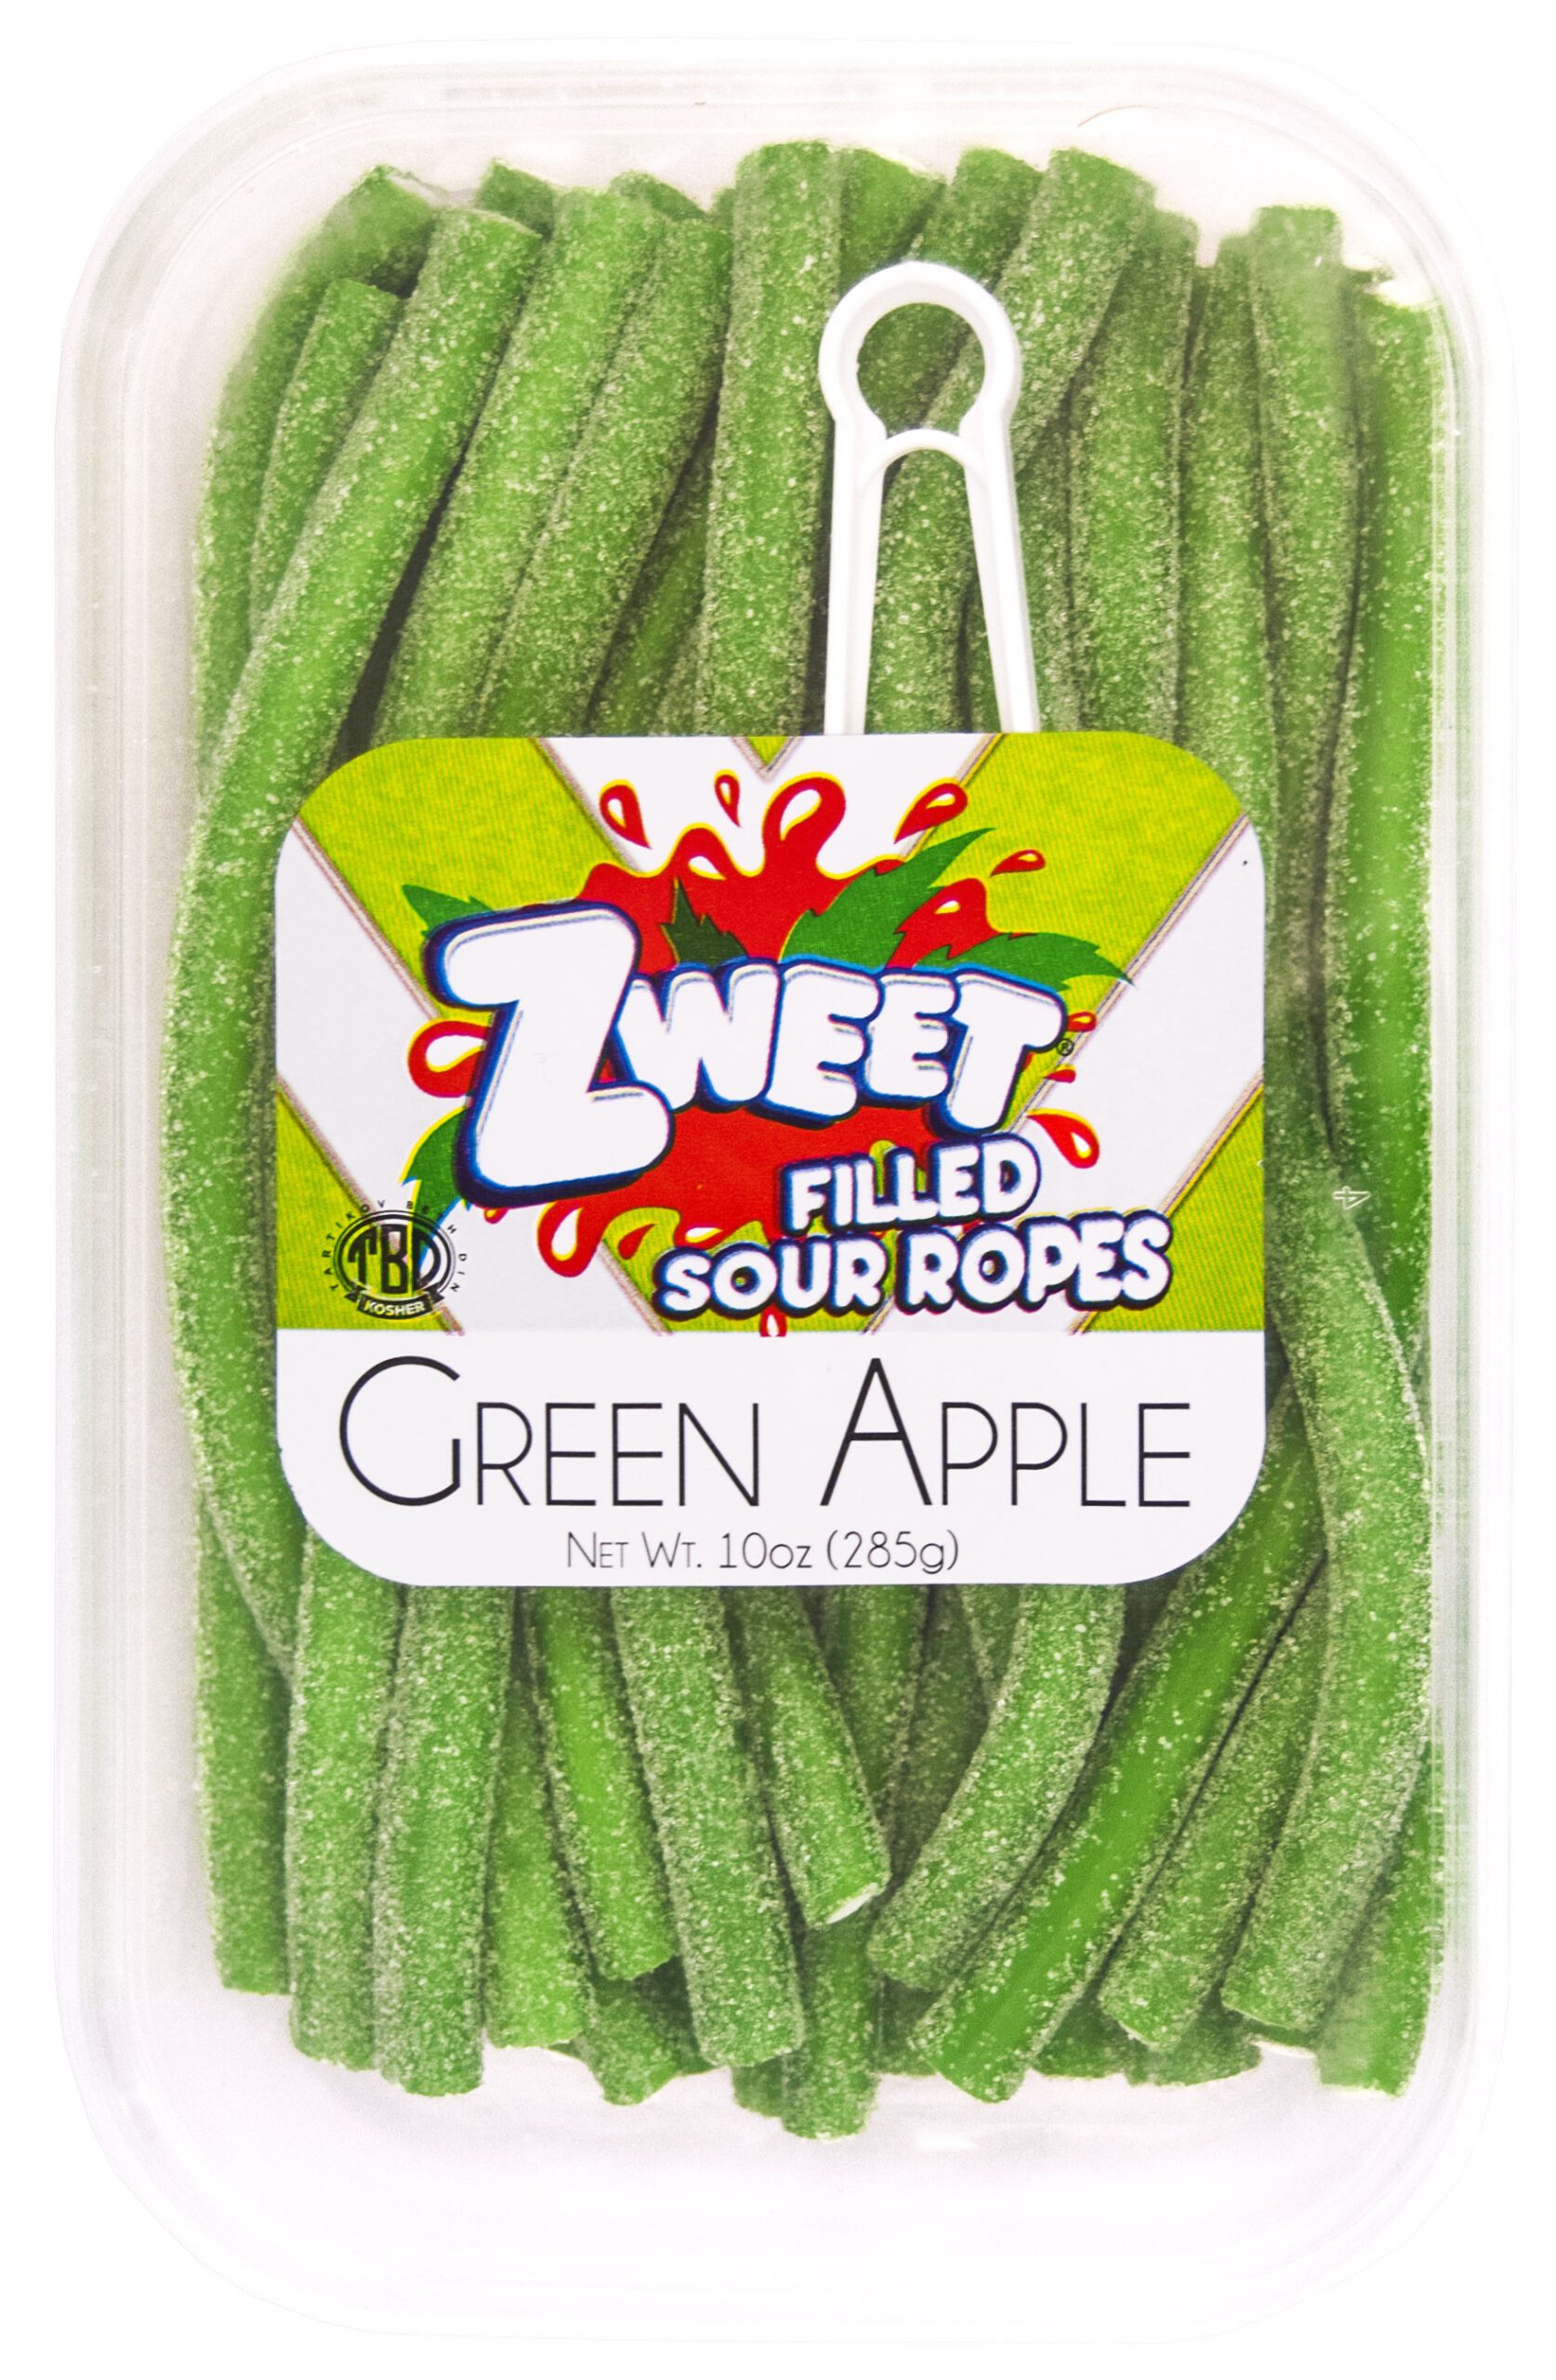 GALIL ZWEET SOUR ROPES GREEN APPLE